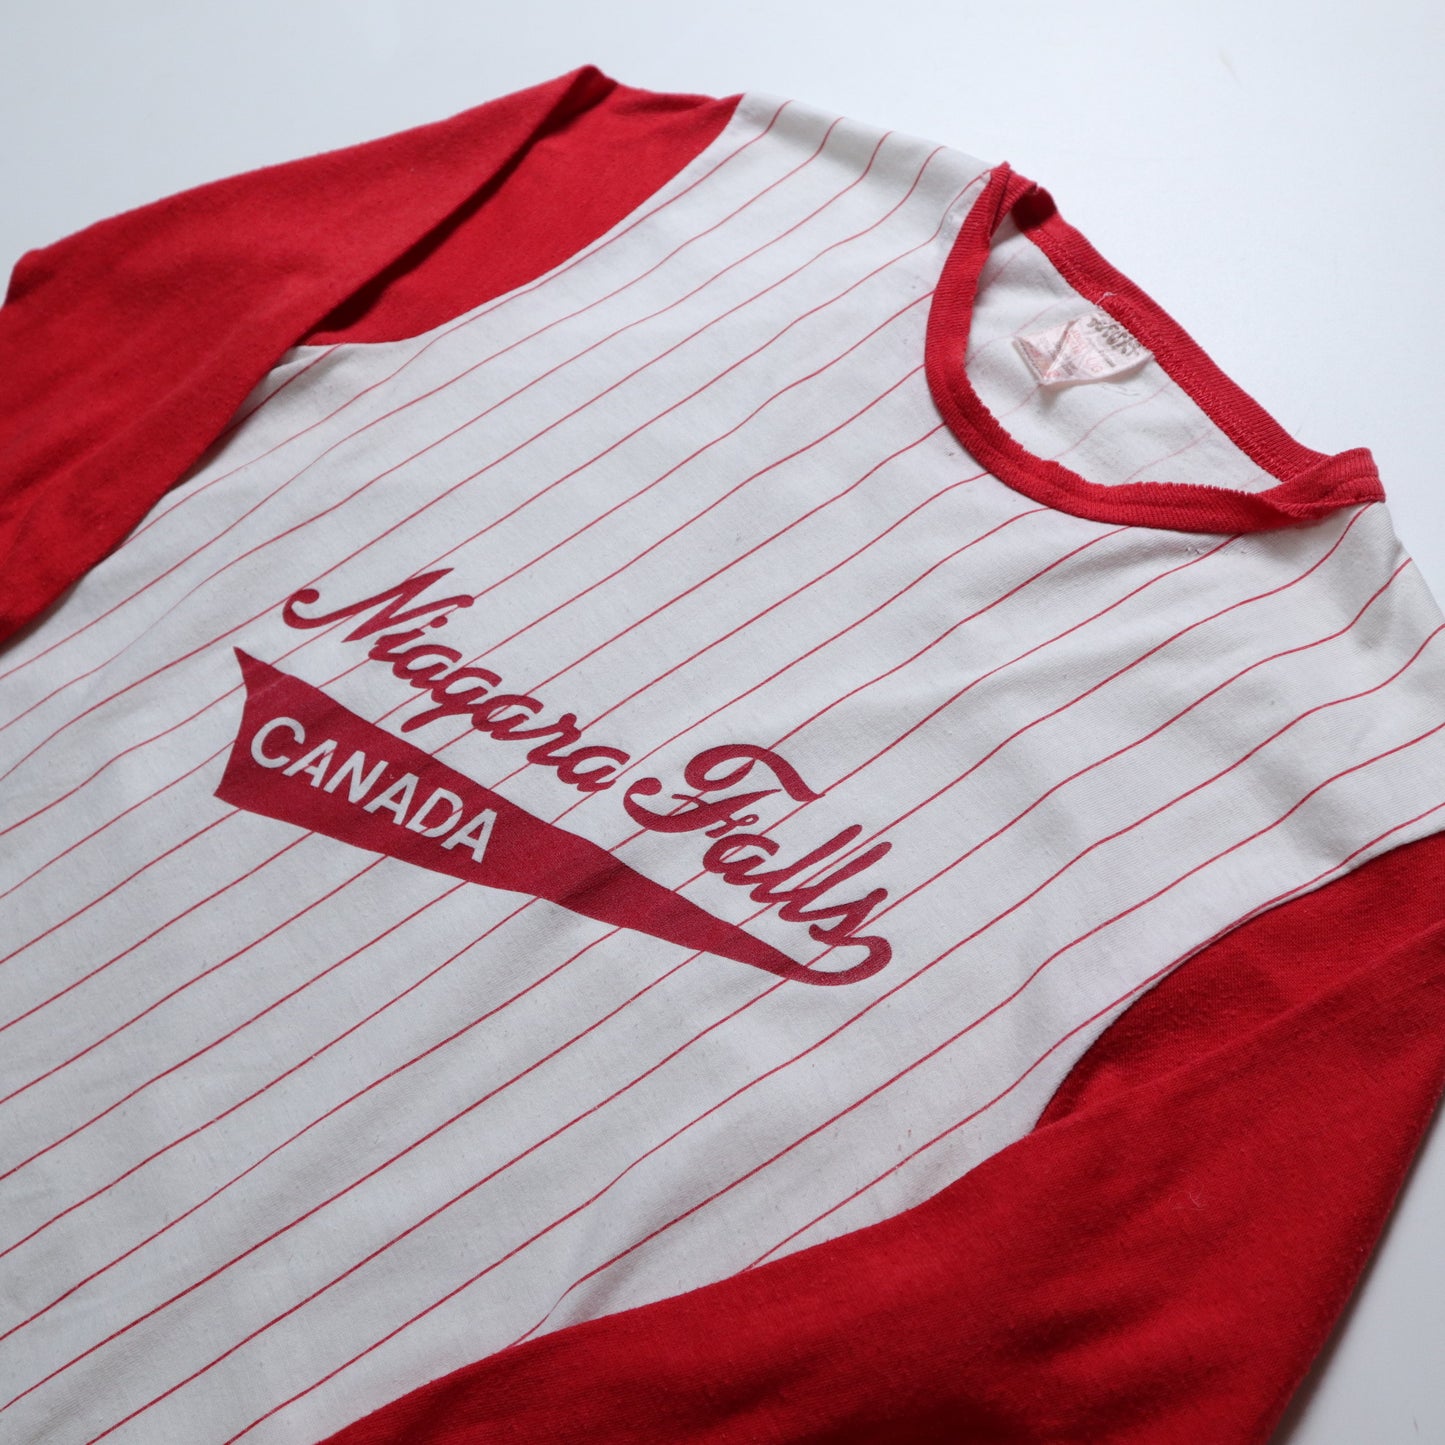 70-80s Canadian-made Niagara Falls red and white striped 7-quarter sleeve baseball top